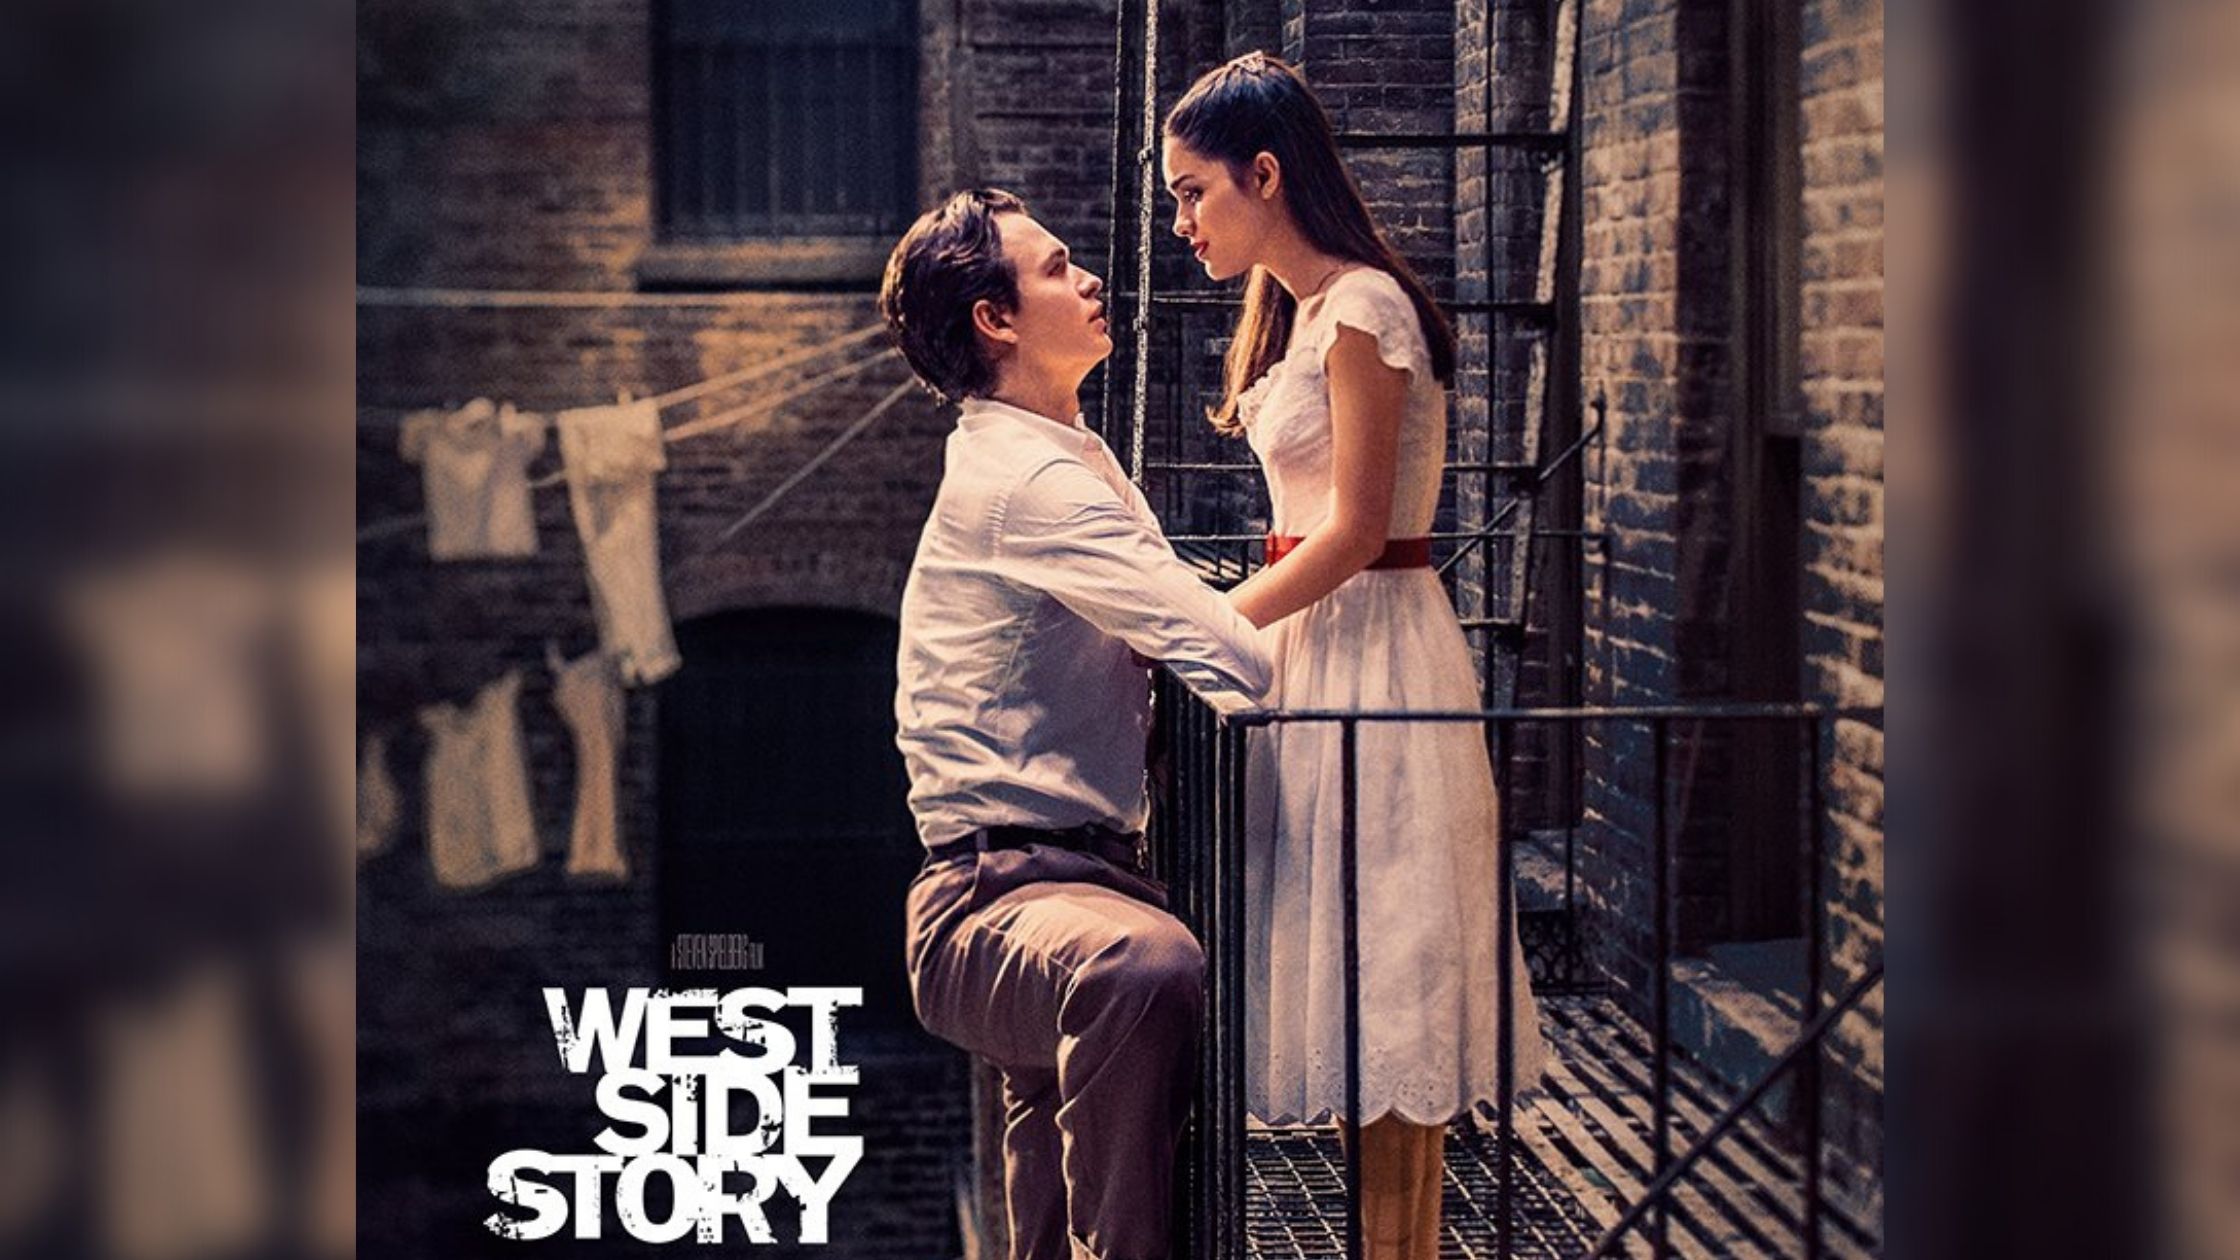 ‘West Side Story’ movie soundtrack available now!